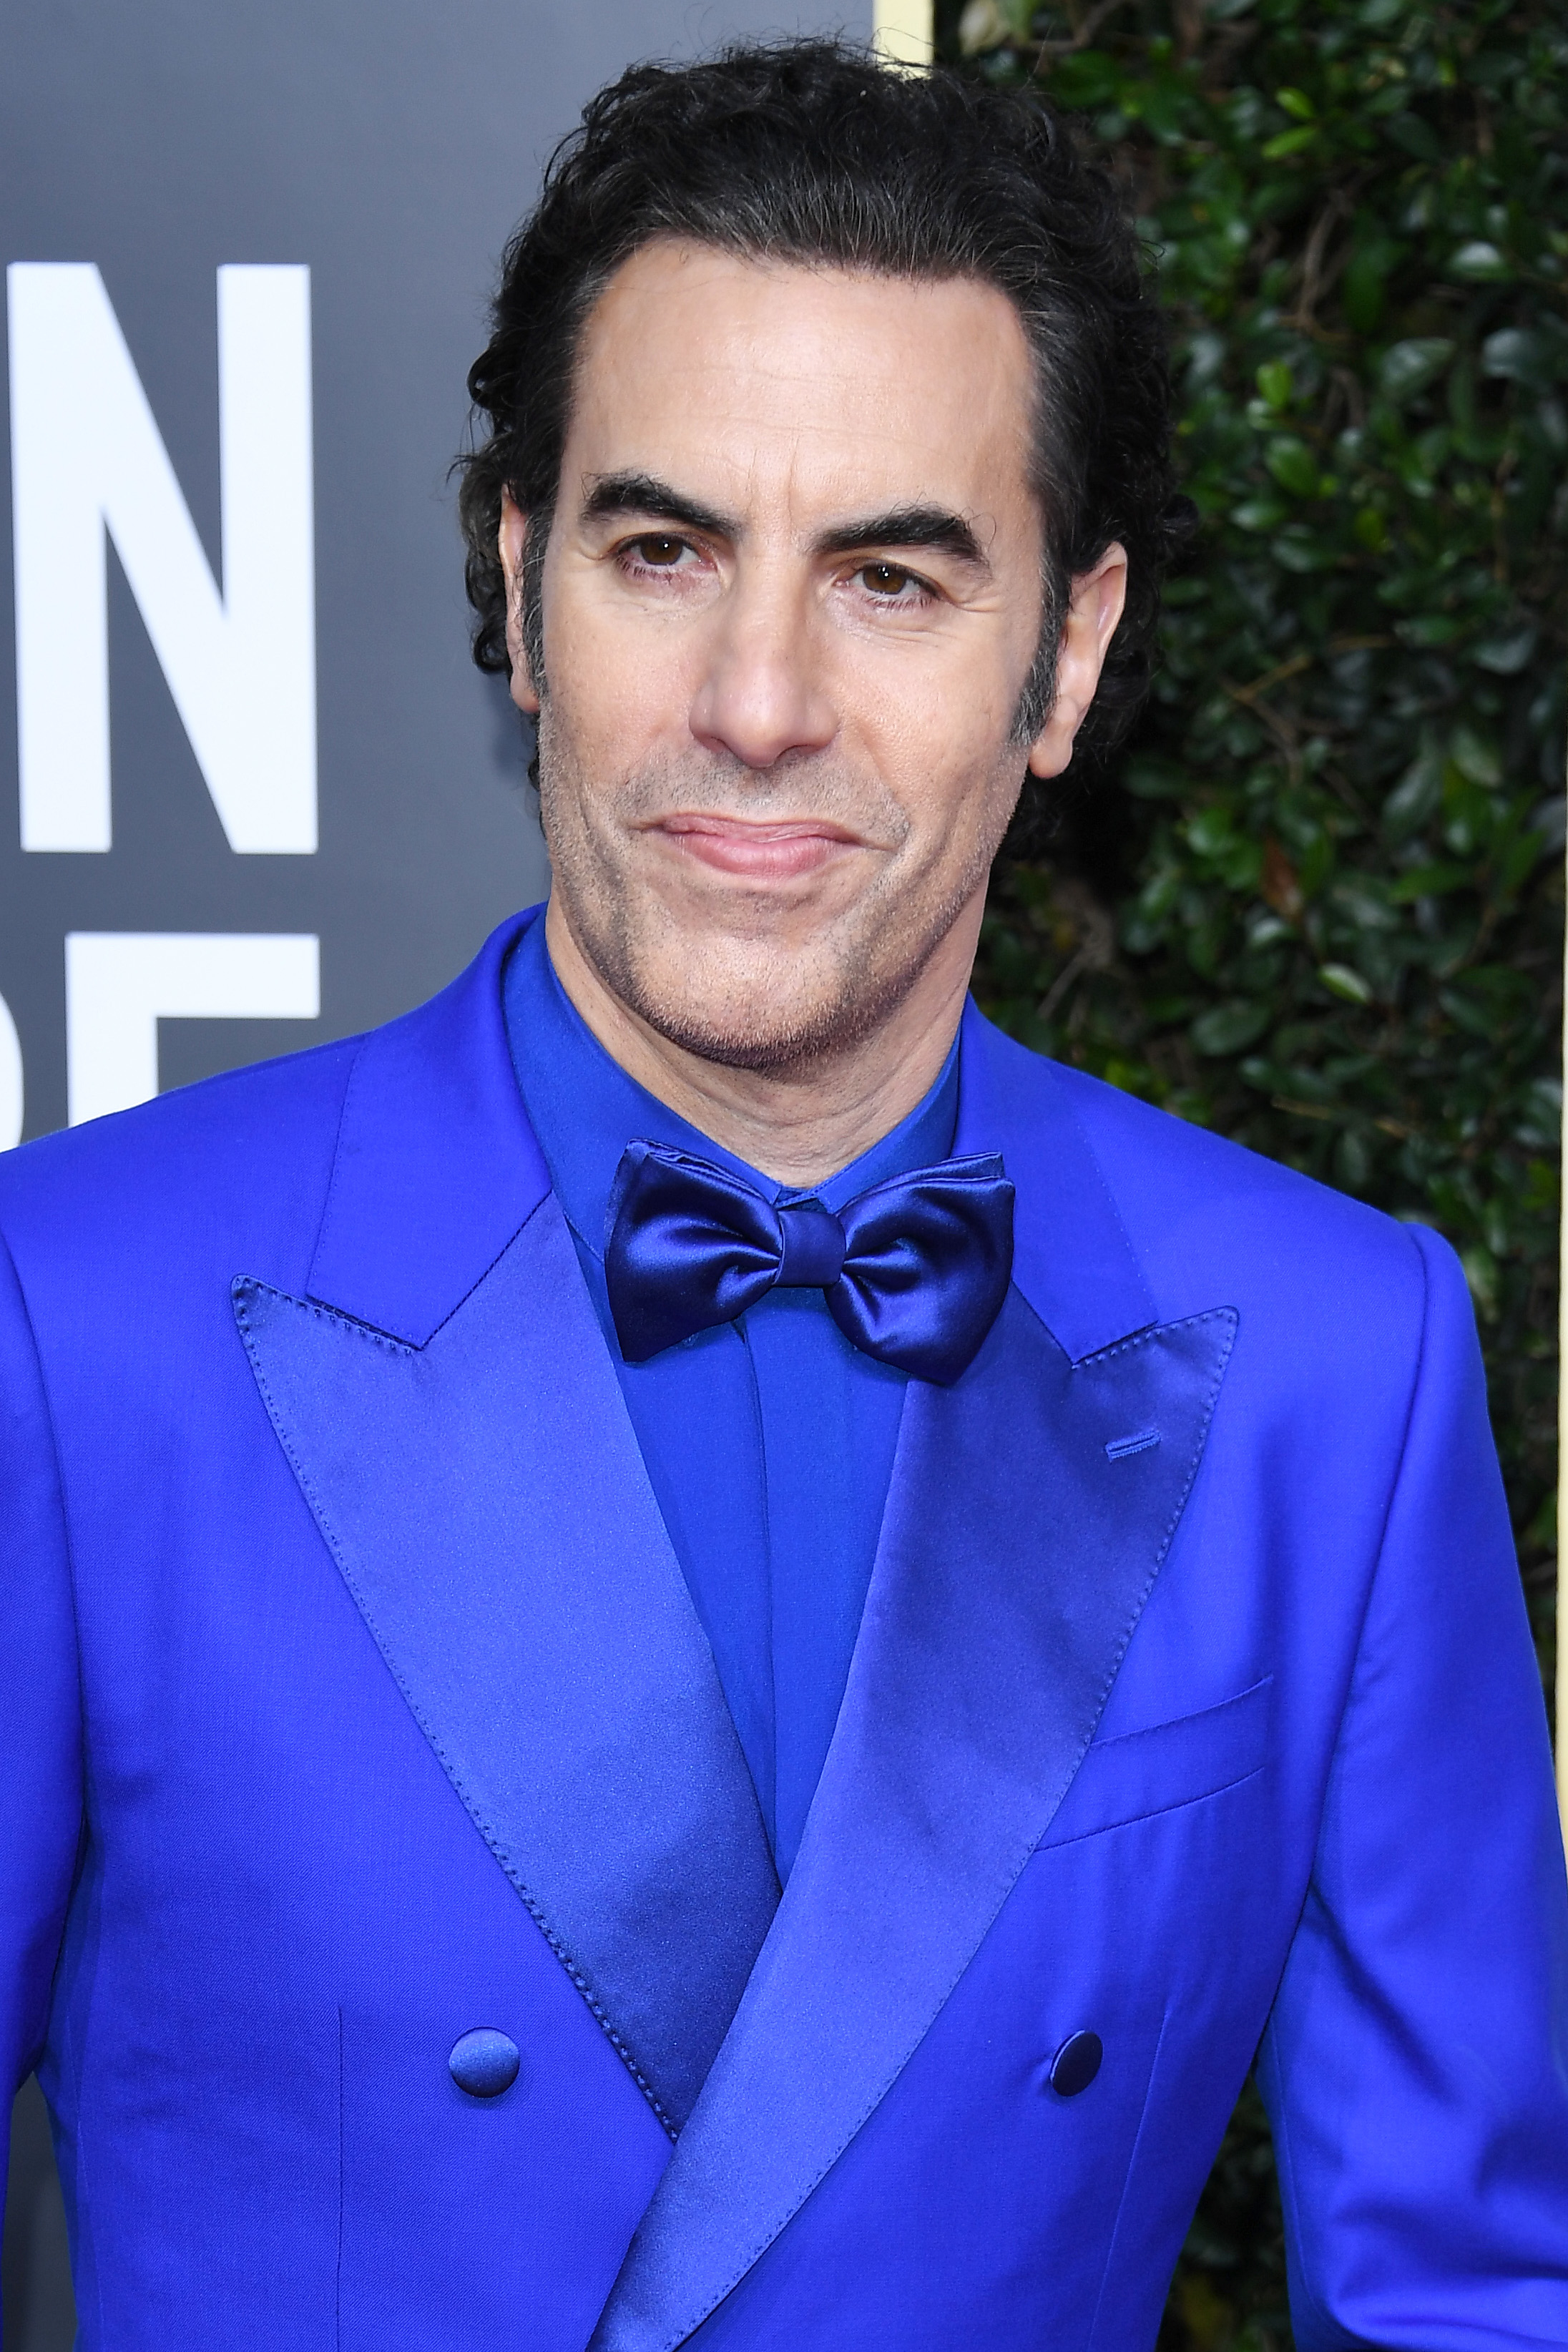 Sacha Baron Cohen in a sharp blue suit with bow tie, posing at an event